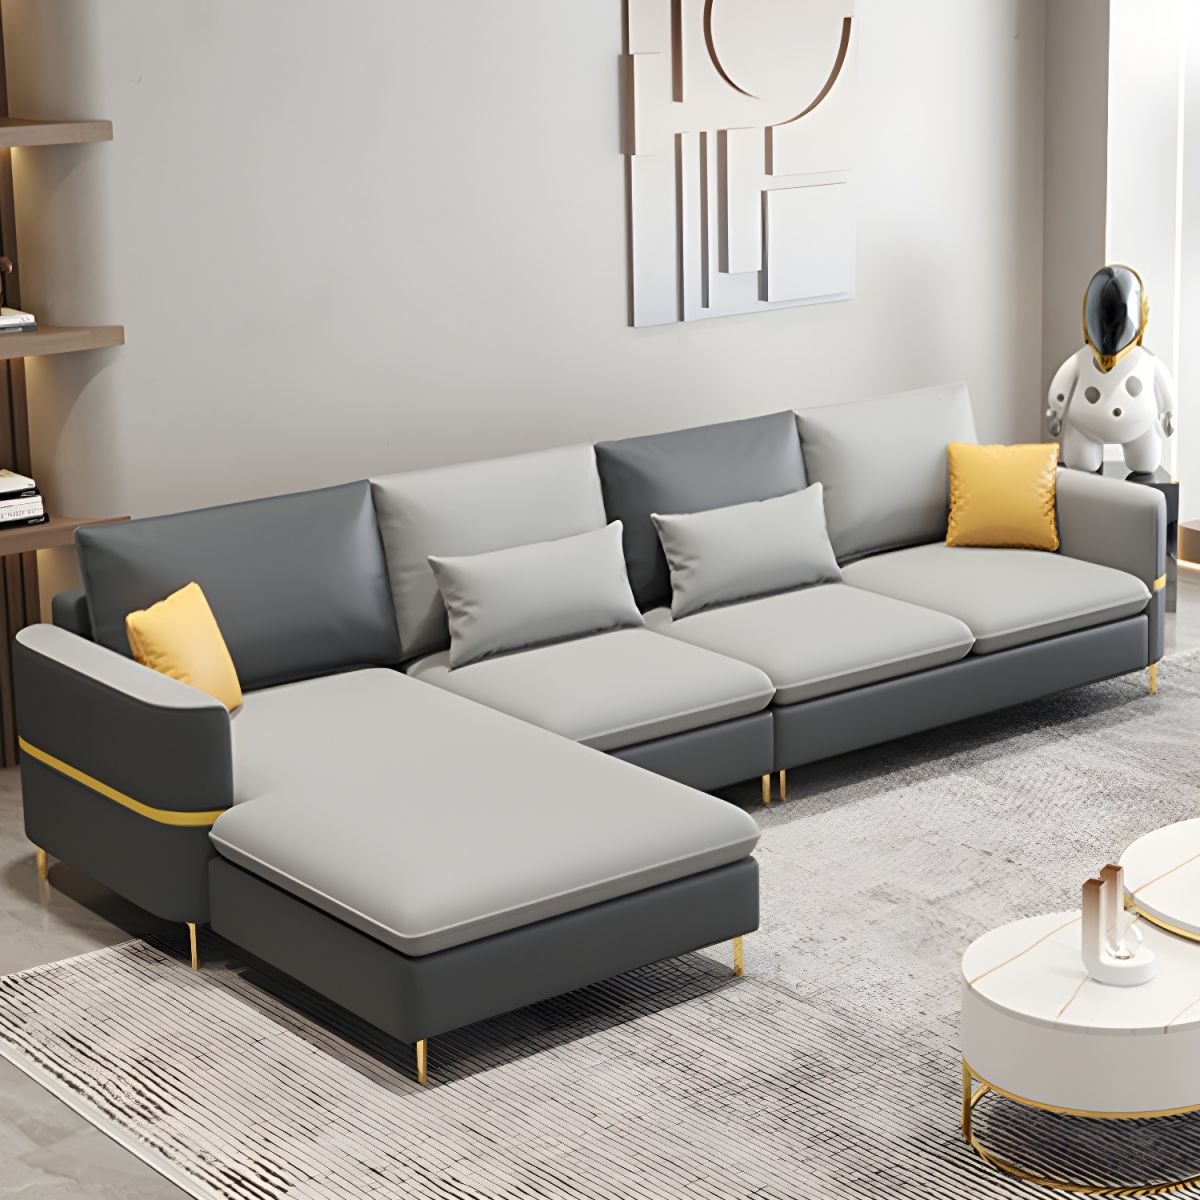 Glamorous Tech Cloth L-Shape Sectional Sofa with Square Arm and Pillow Back in 3 Piece Set - Dark/ Light Grey Tech Cloth Latex & Down Left